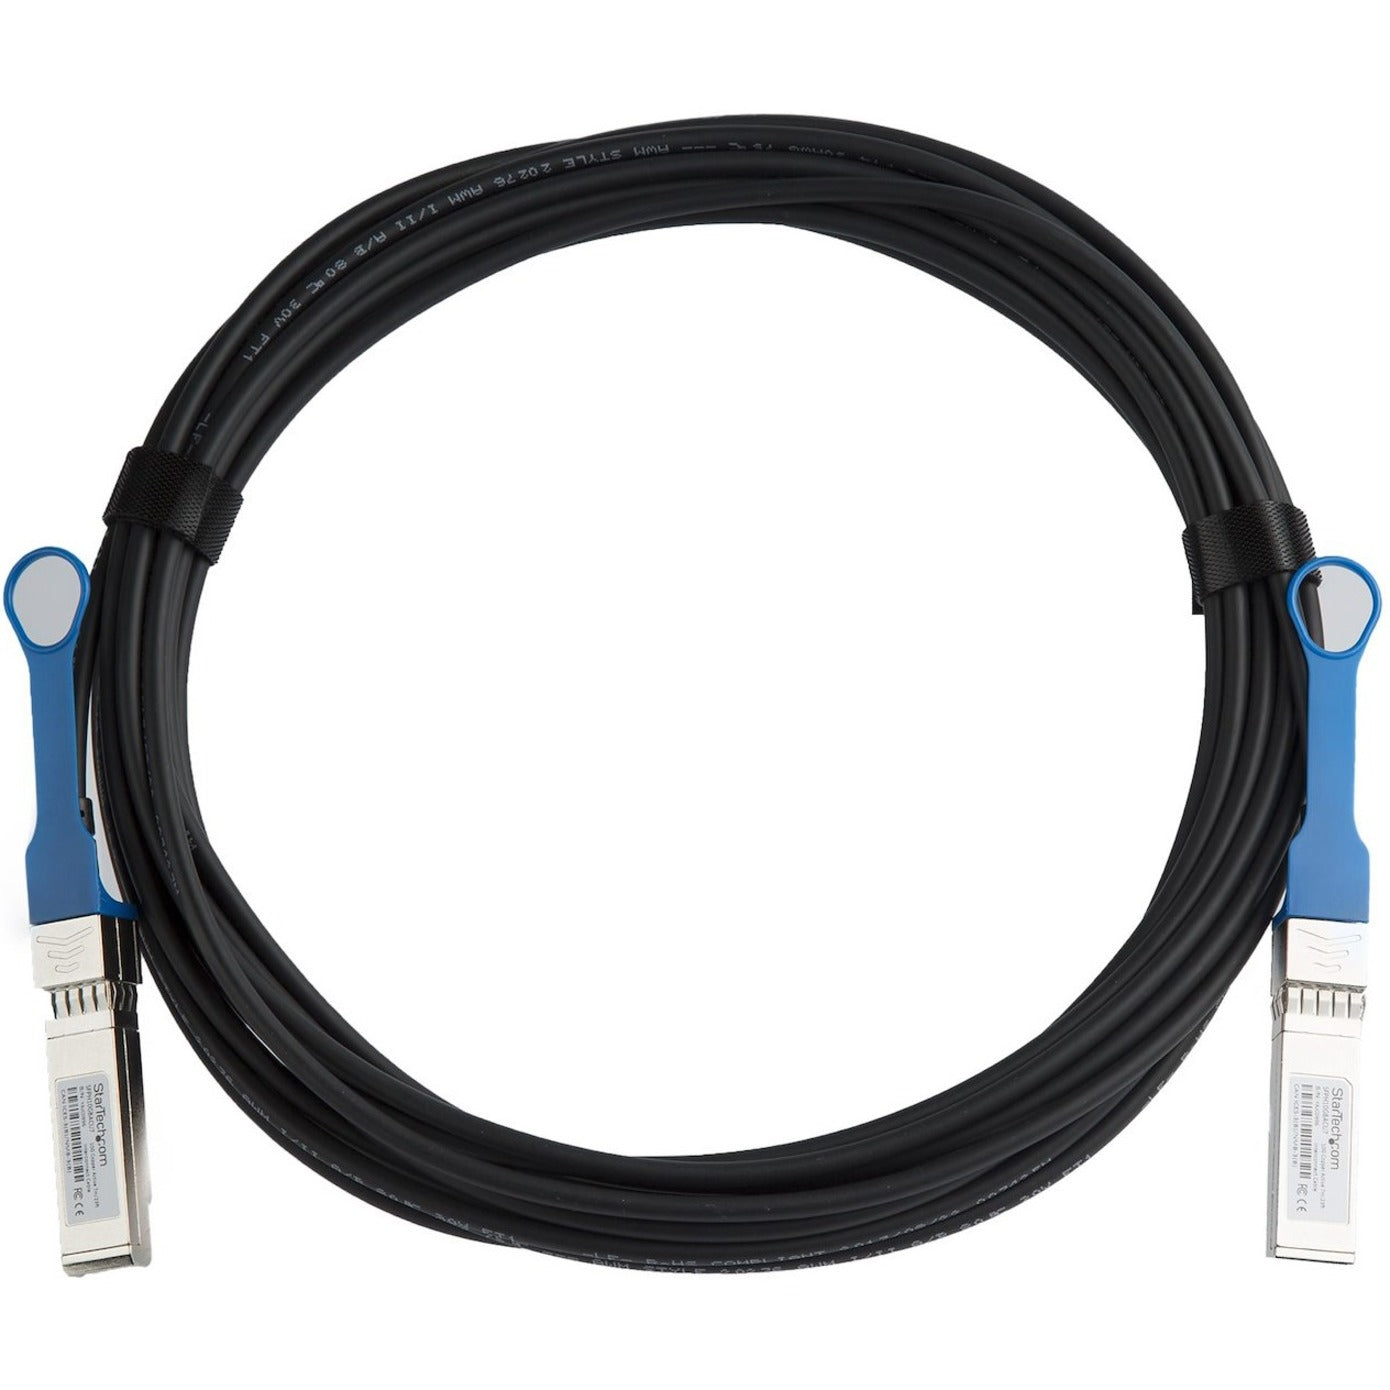 StarTech.com SFPH10GBACU7 SFP+ Direct Attach Cable - 7 m (23 ft.), Hot-swappable, Active, 10 Gbit/s